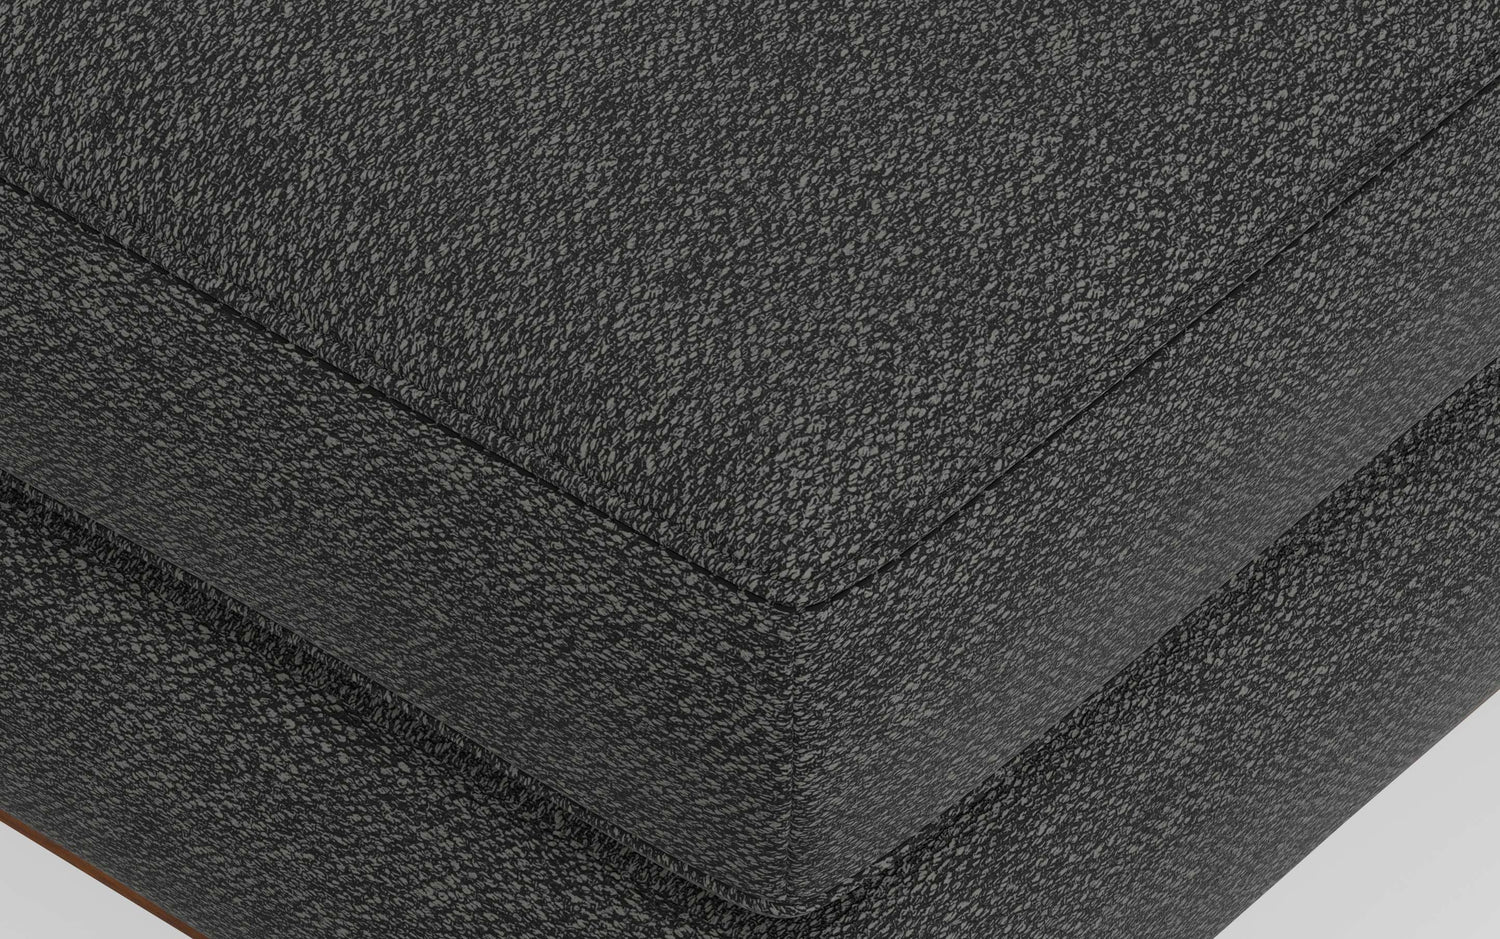 Charcoal Grey Woven Polyester Fabric | Morrison 89-inch Sofa and Ottoman Set